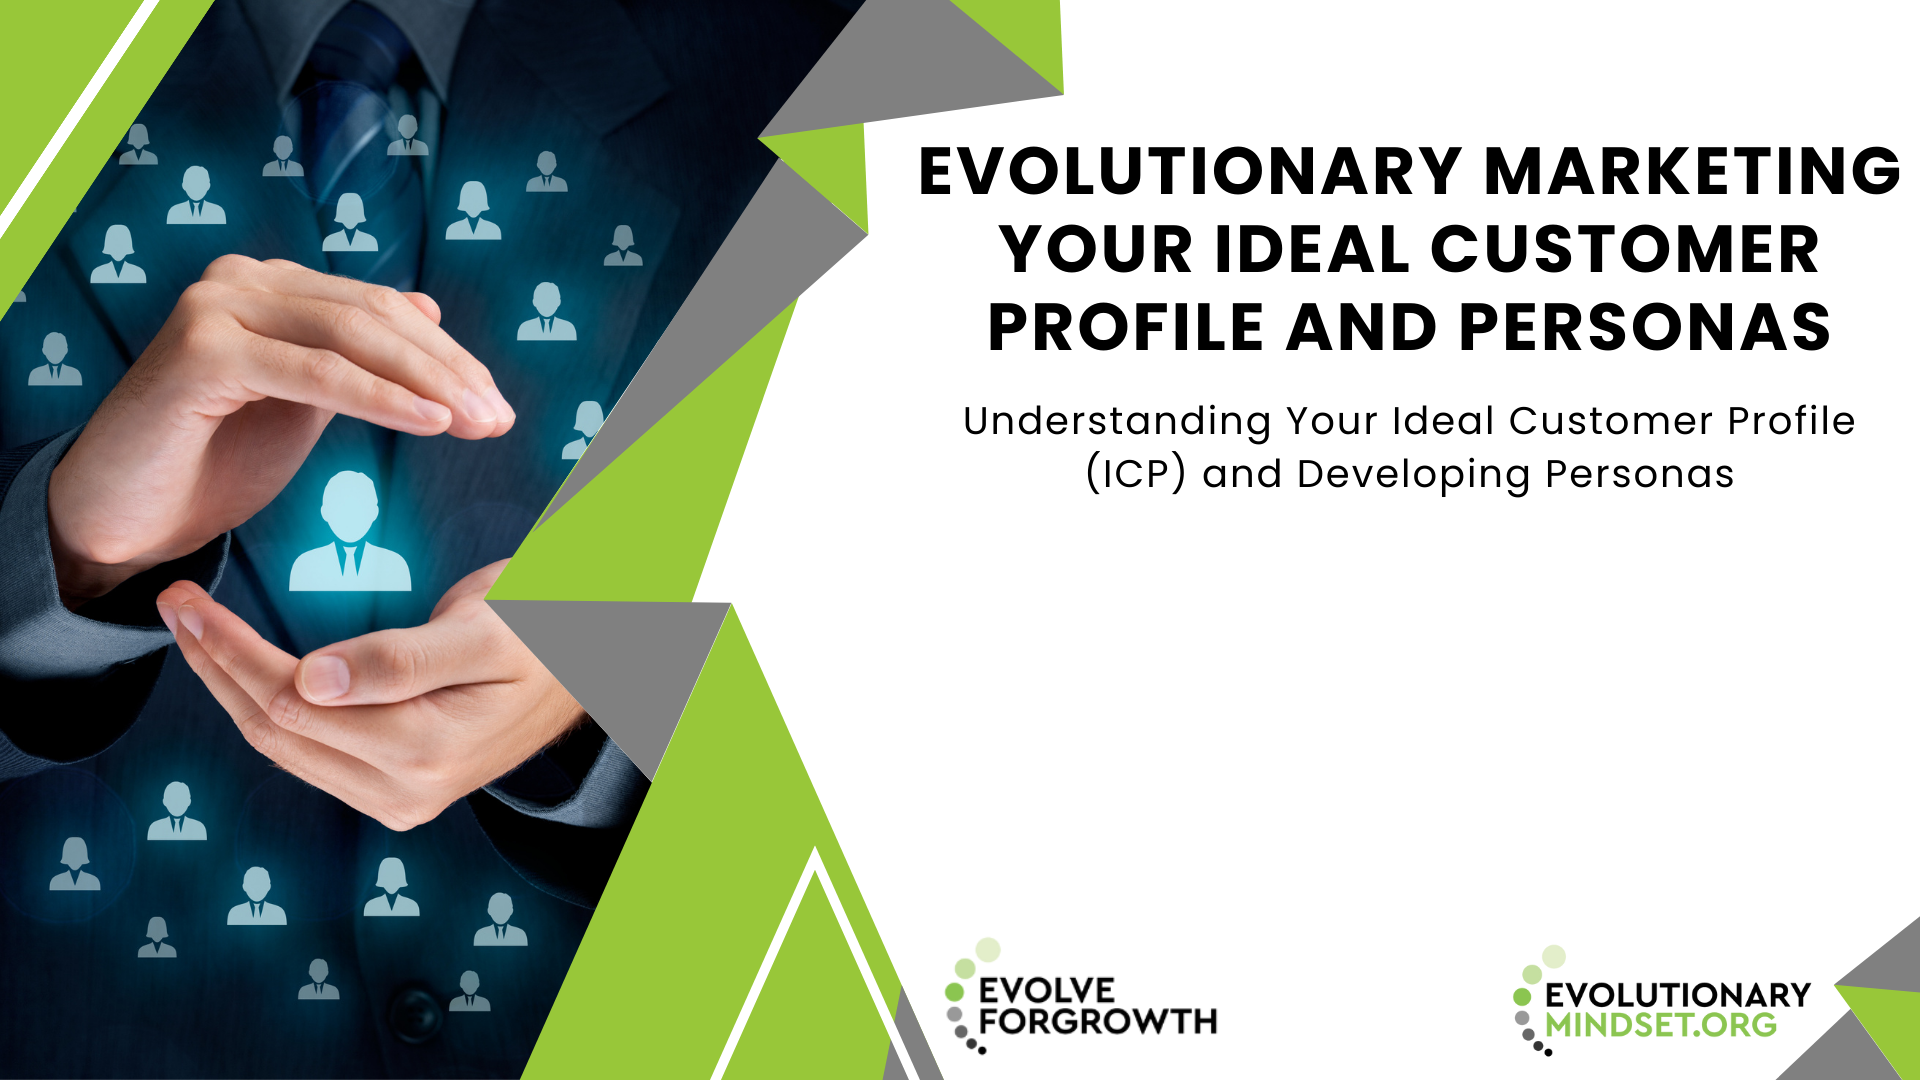 2. Evolutionary Marketing - Identify Your Ideal Customer Profile & Personal Development with Design (1)